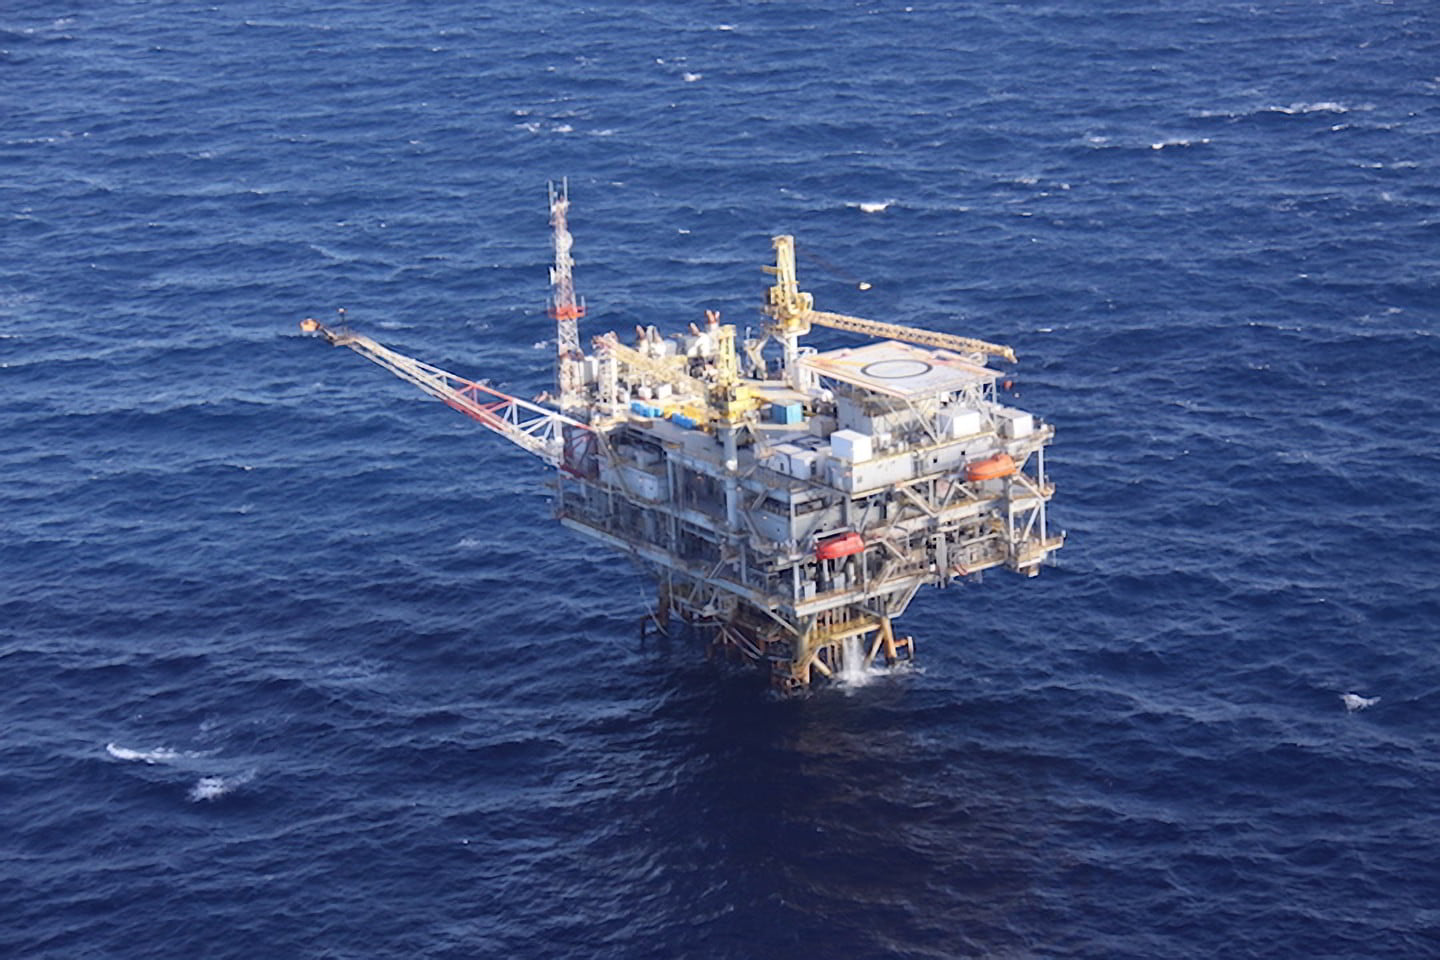 U.S. operator flows first oil from deepwater project in Gulf of Mexico